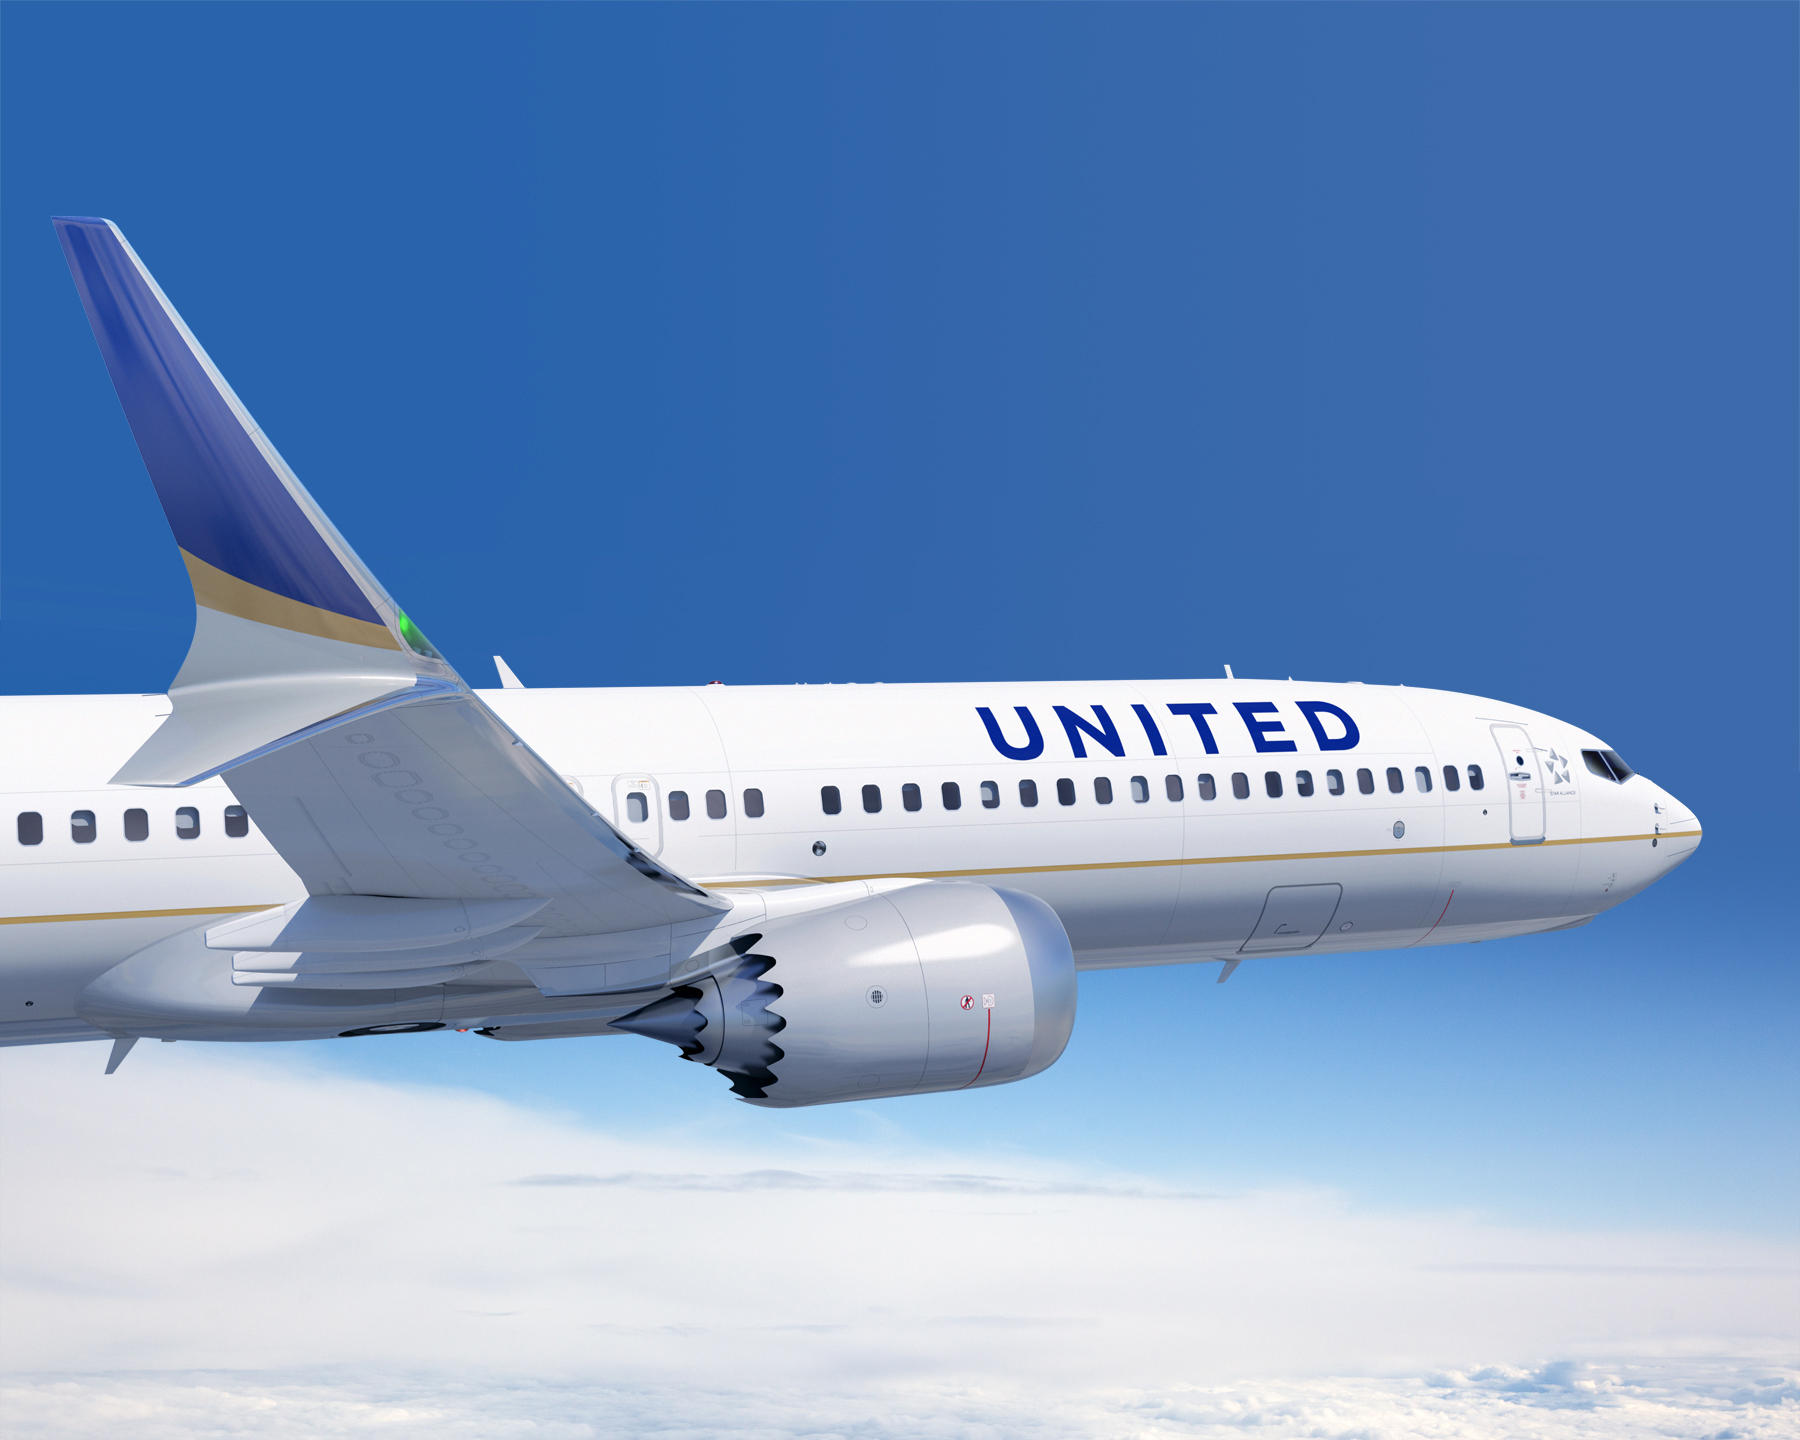 Two United Airlines economy class tickets for travel from